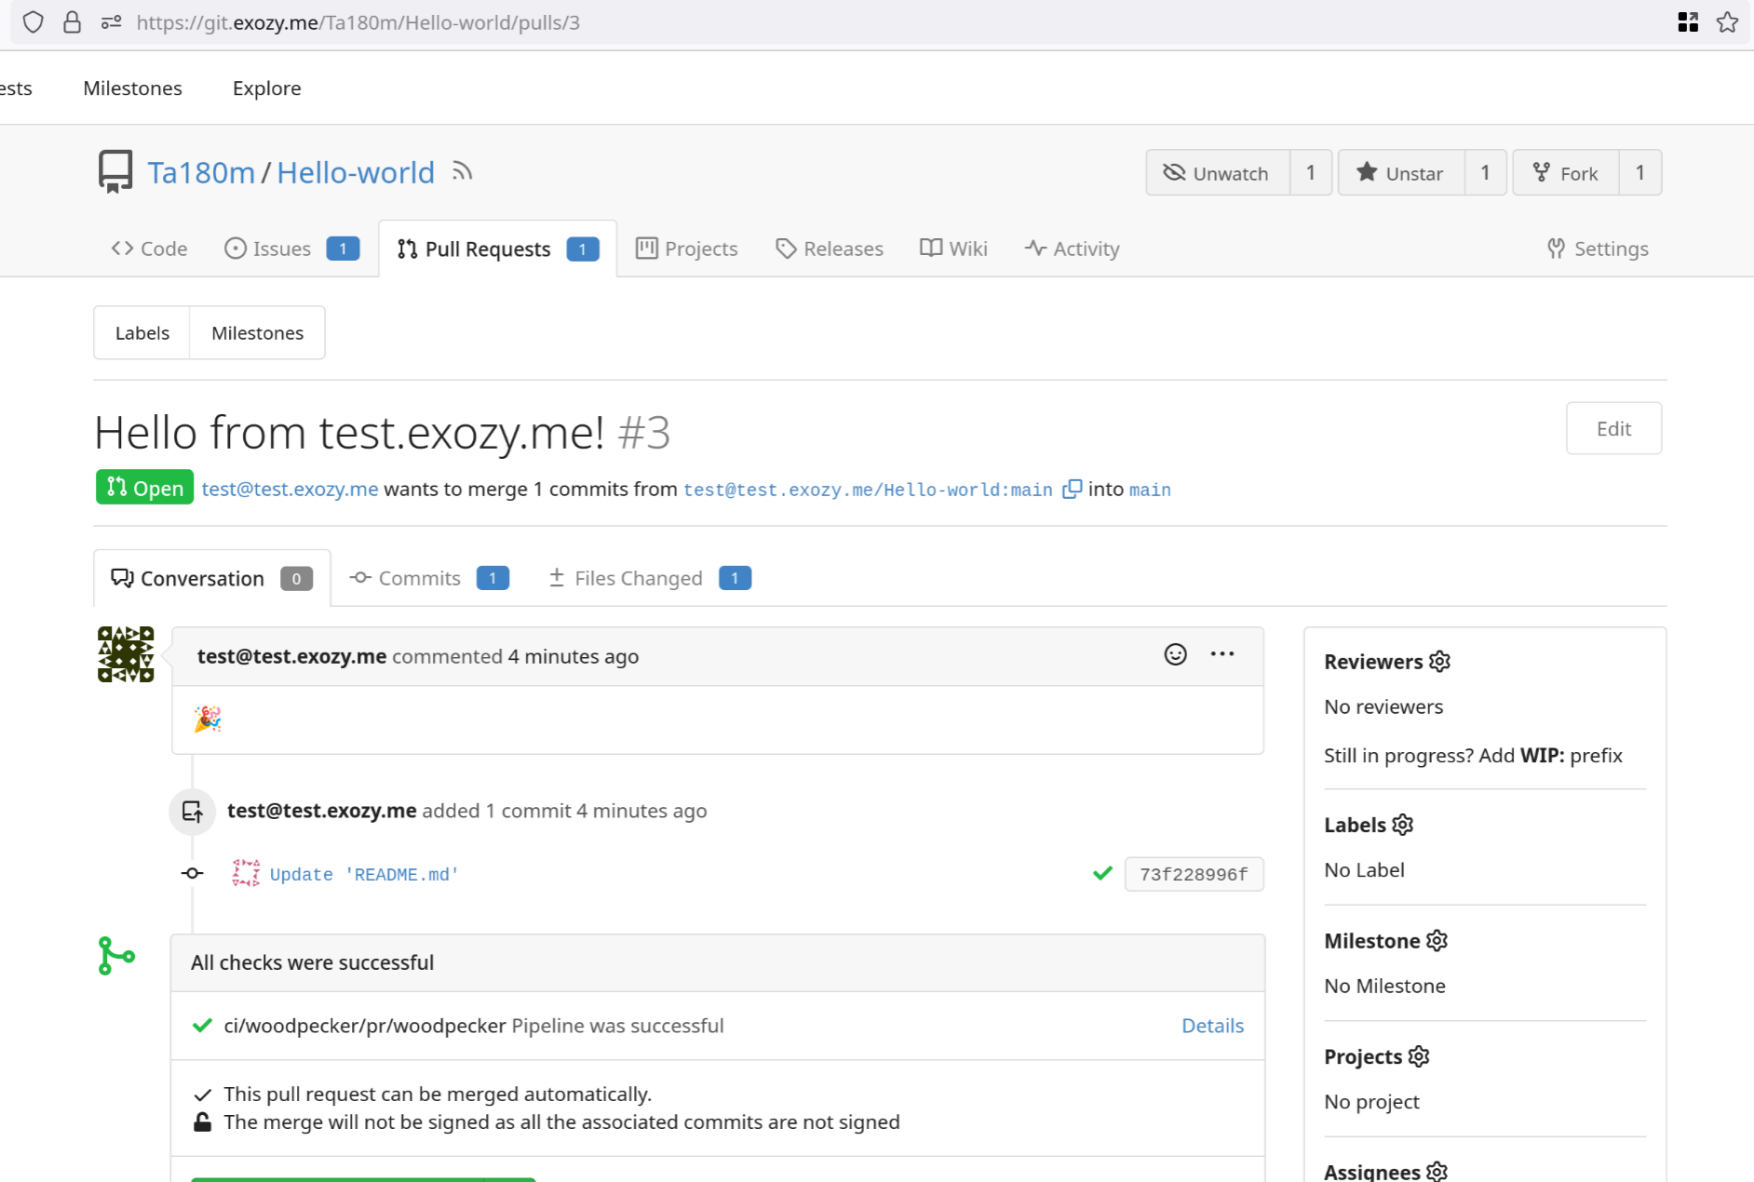 A pull request submitted on my Hello-world repository by the user test@test.exozy.me from a remote Gitea instance.